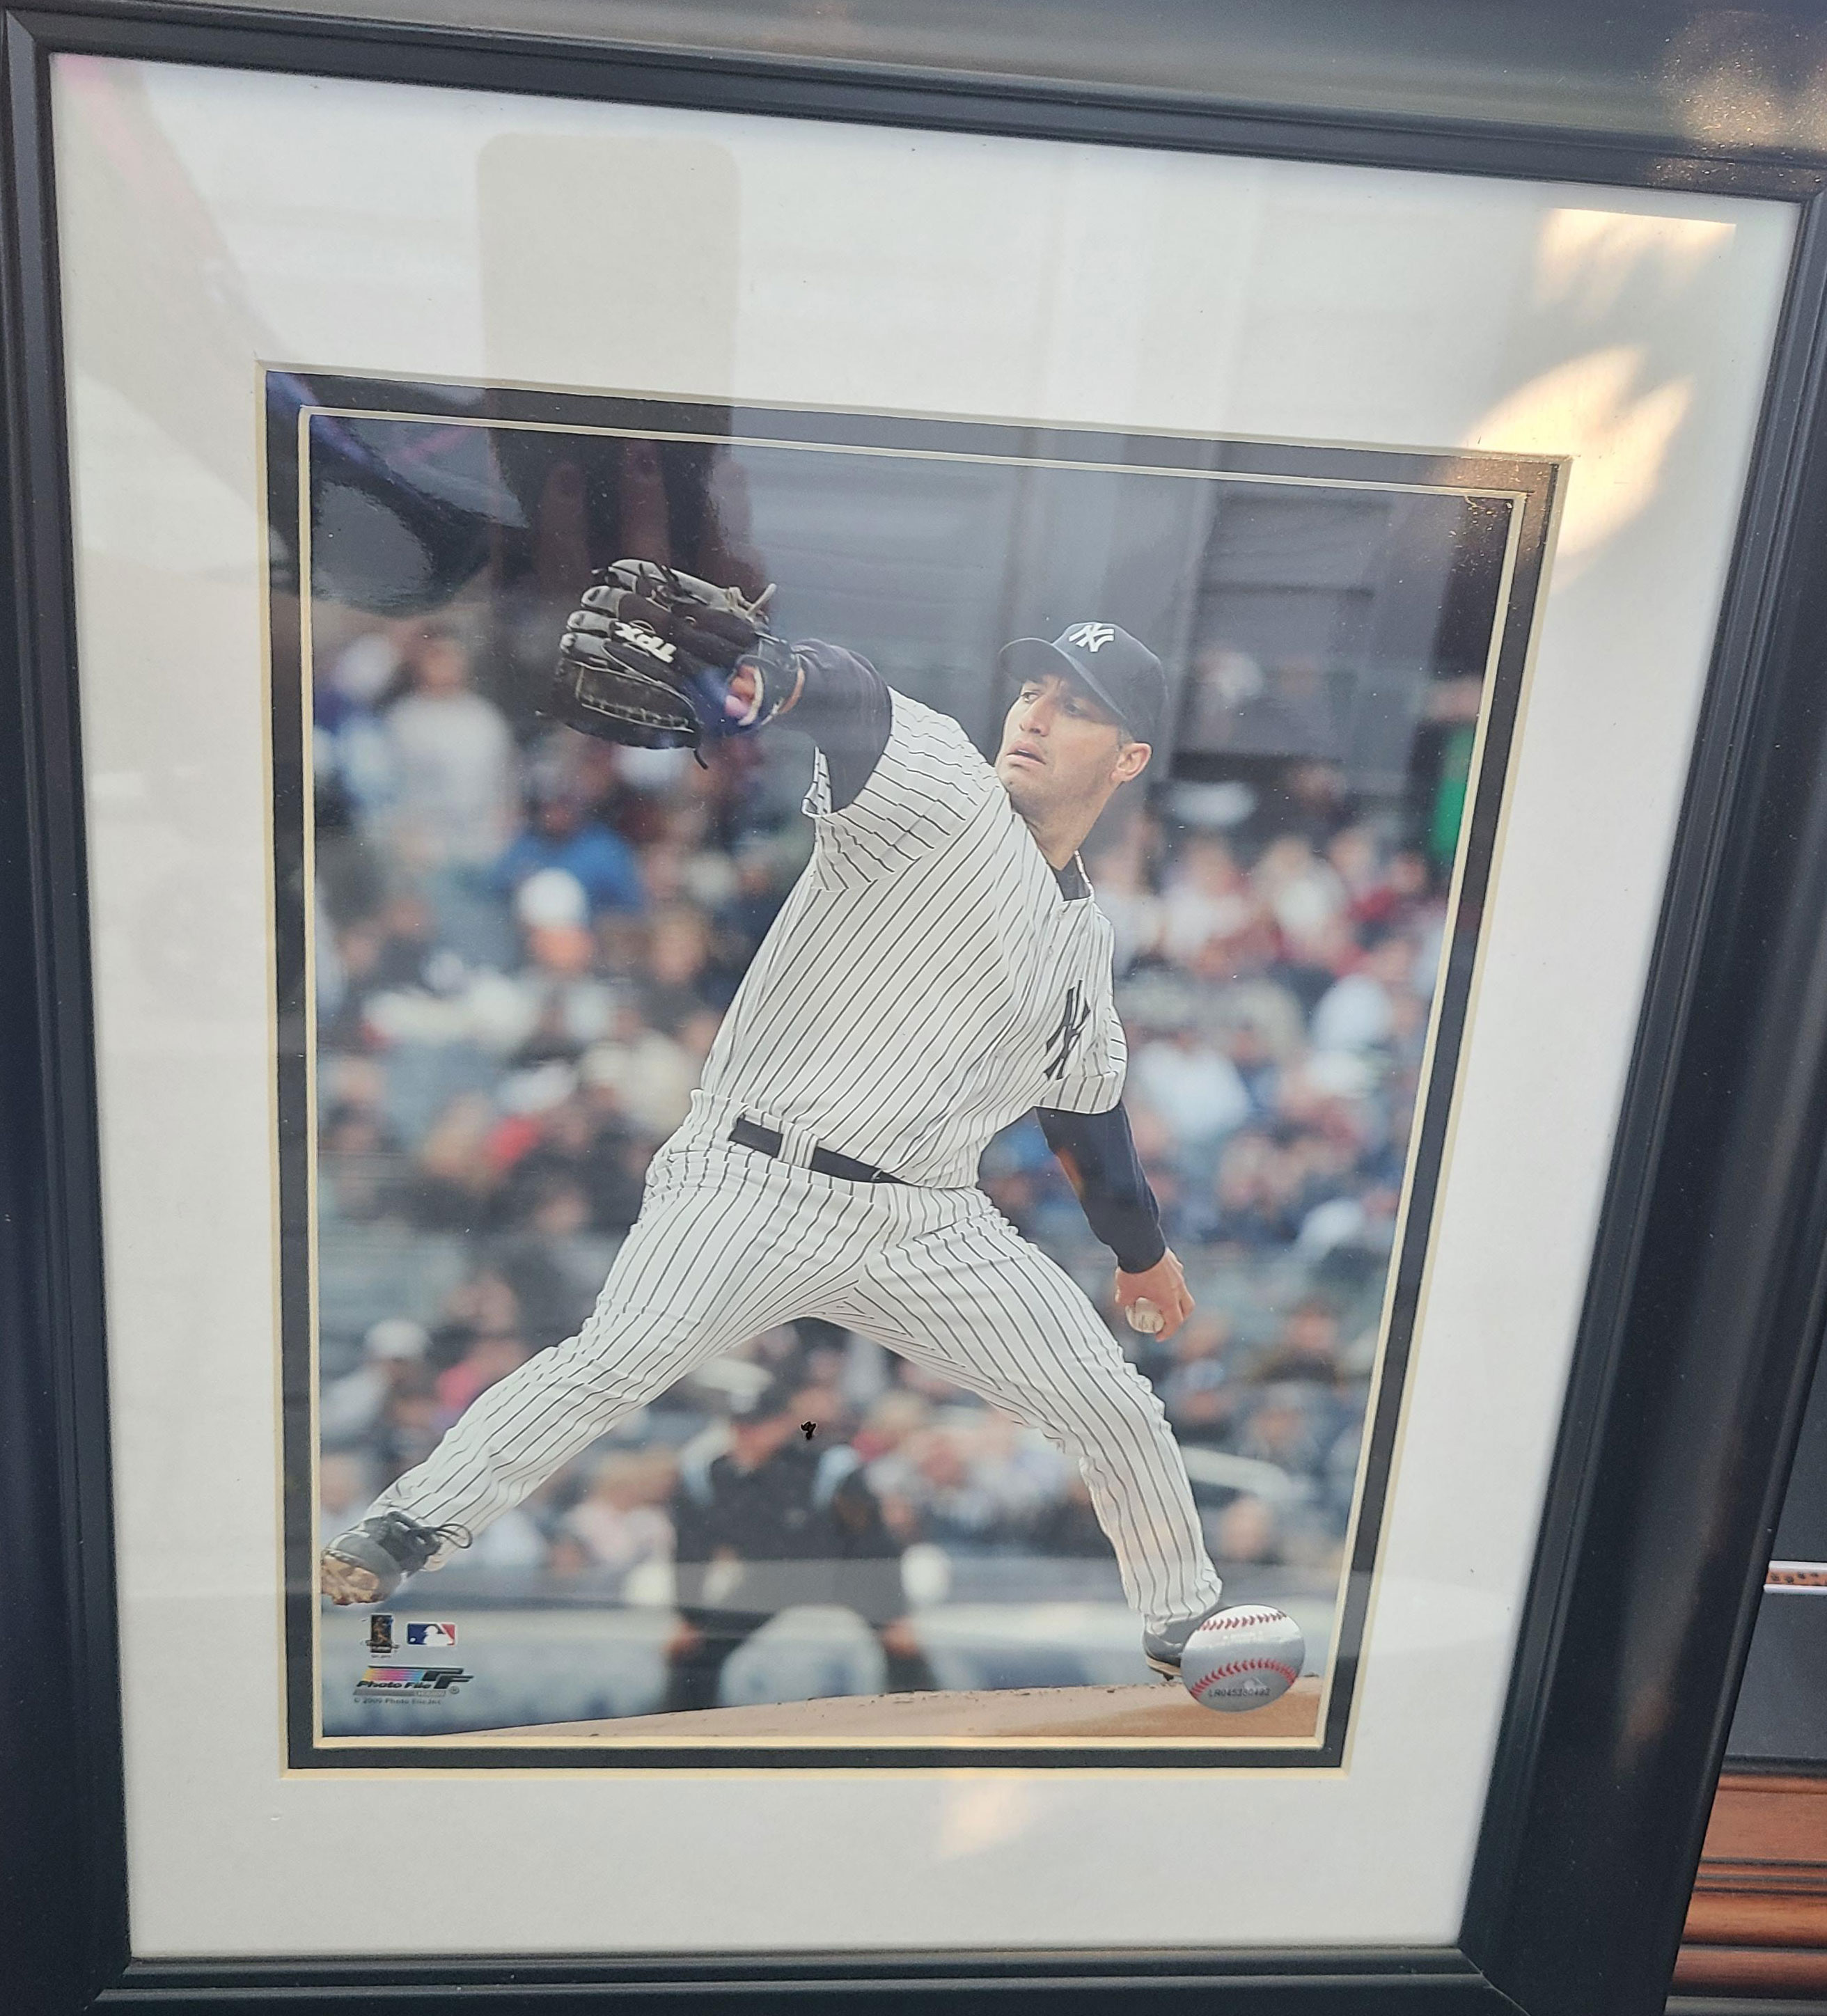 SPORTS: Andy Pettitte Photo and Autographed Baseball